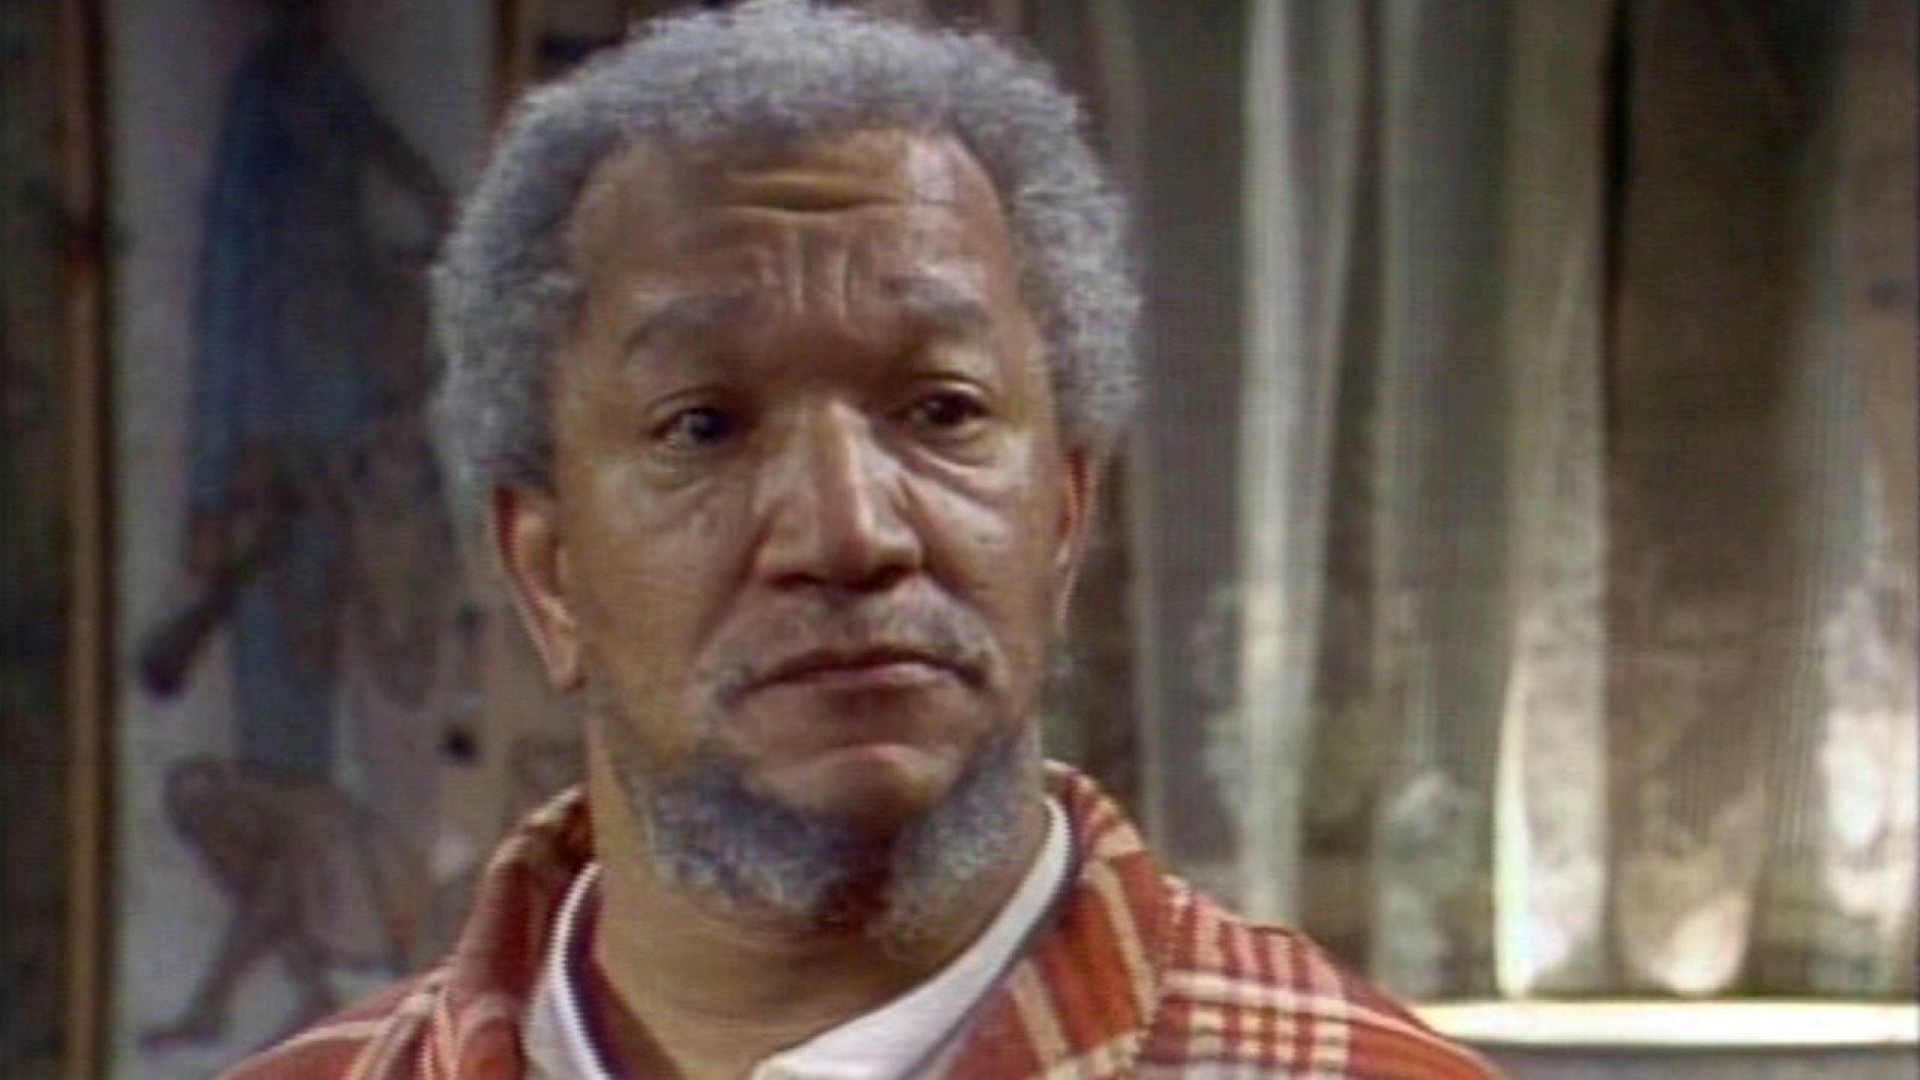 Sanford and Son Season 1 Episode 7 - A Pad for Lamont